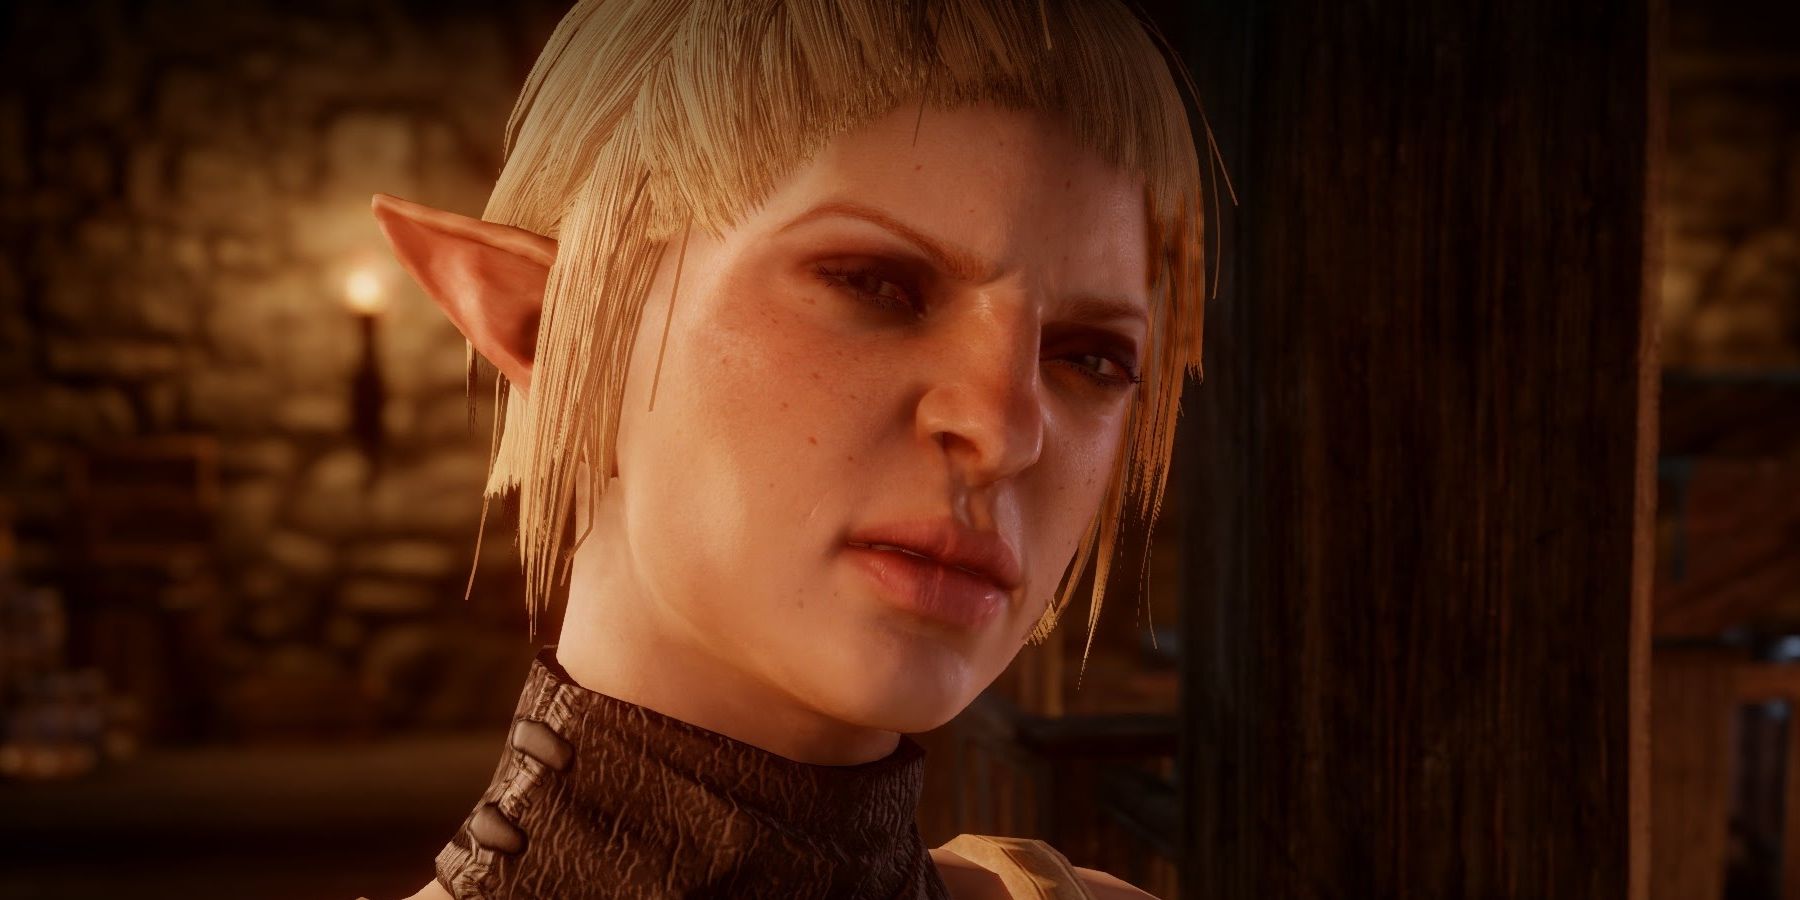 Sera in the Dragon Age games being romanced by the Inquisitor